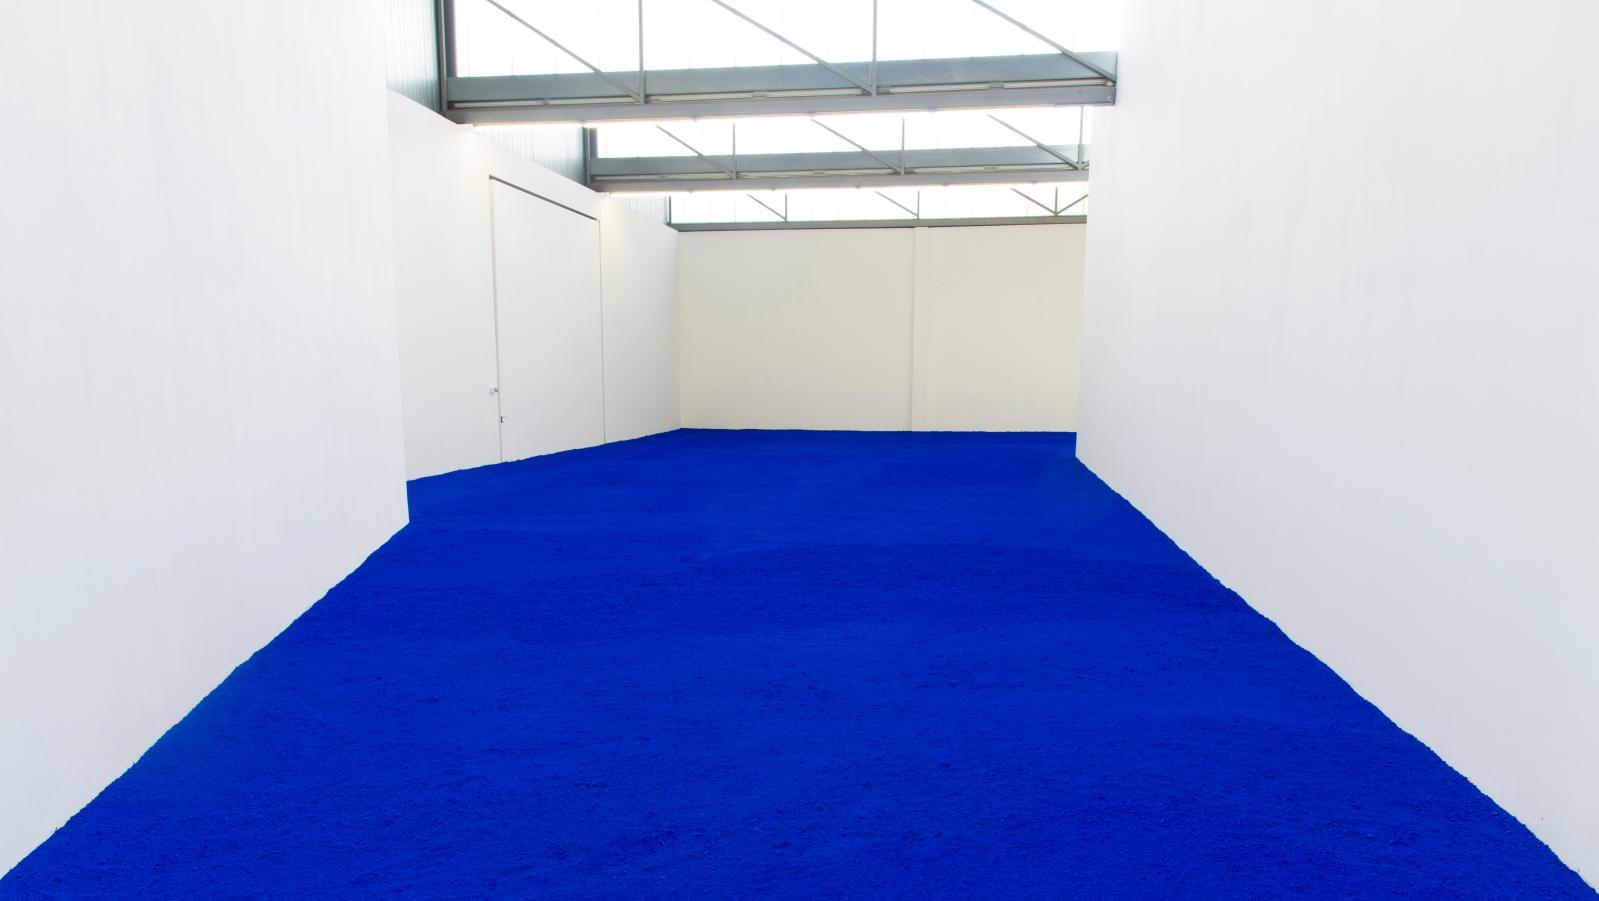 Yves Klein (1928-1962), «Reactivation» of the installation «Pigment pur», created... “Pure Pigment” 